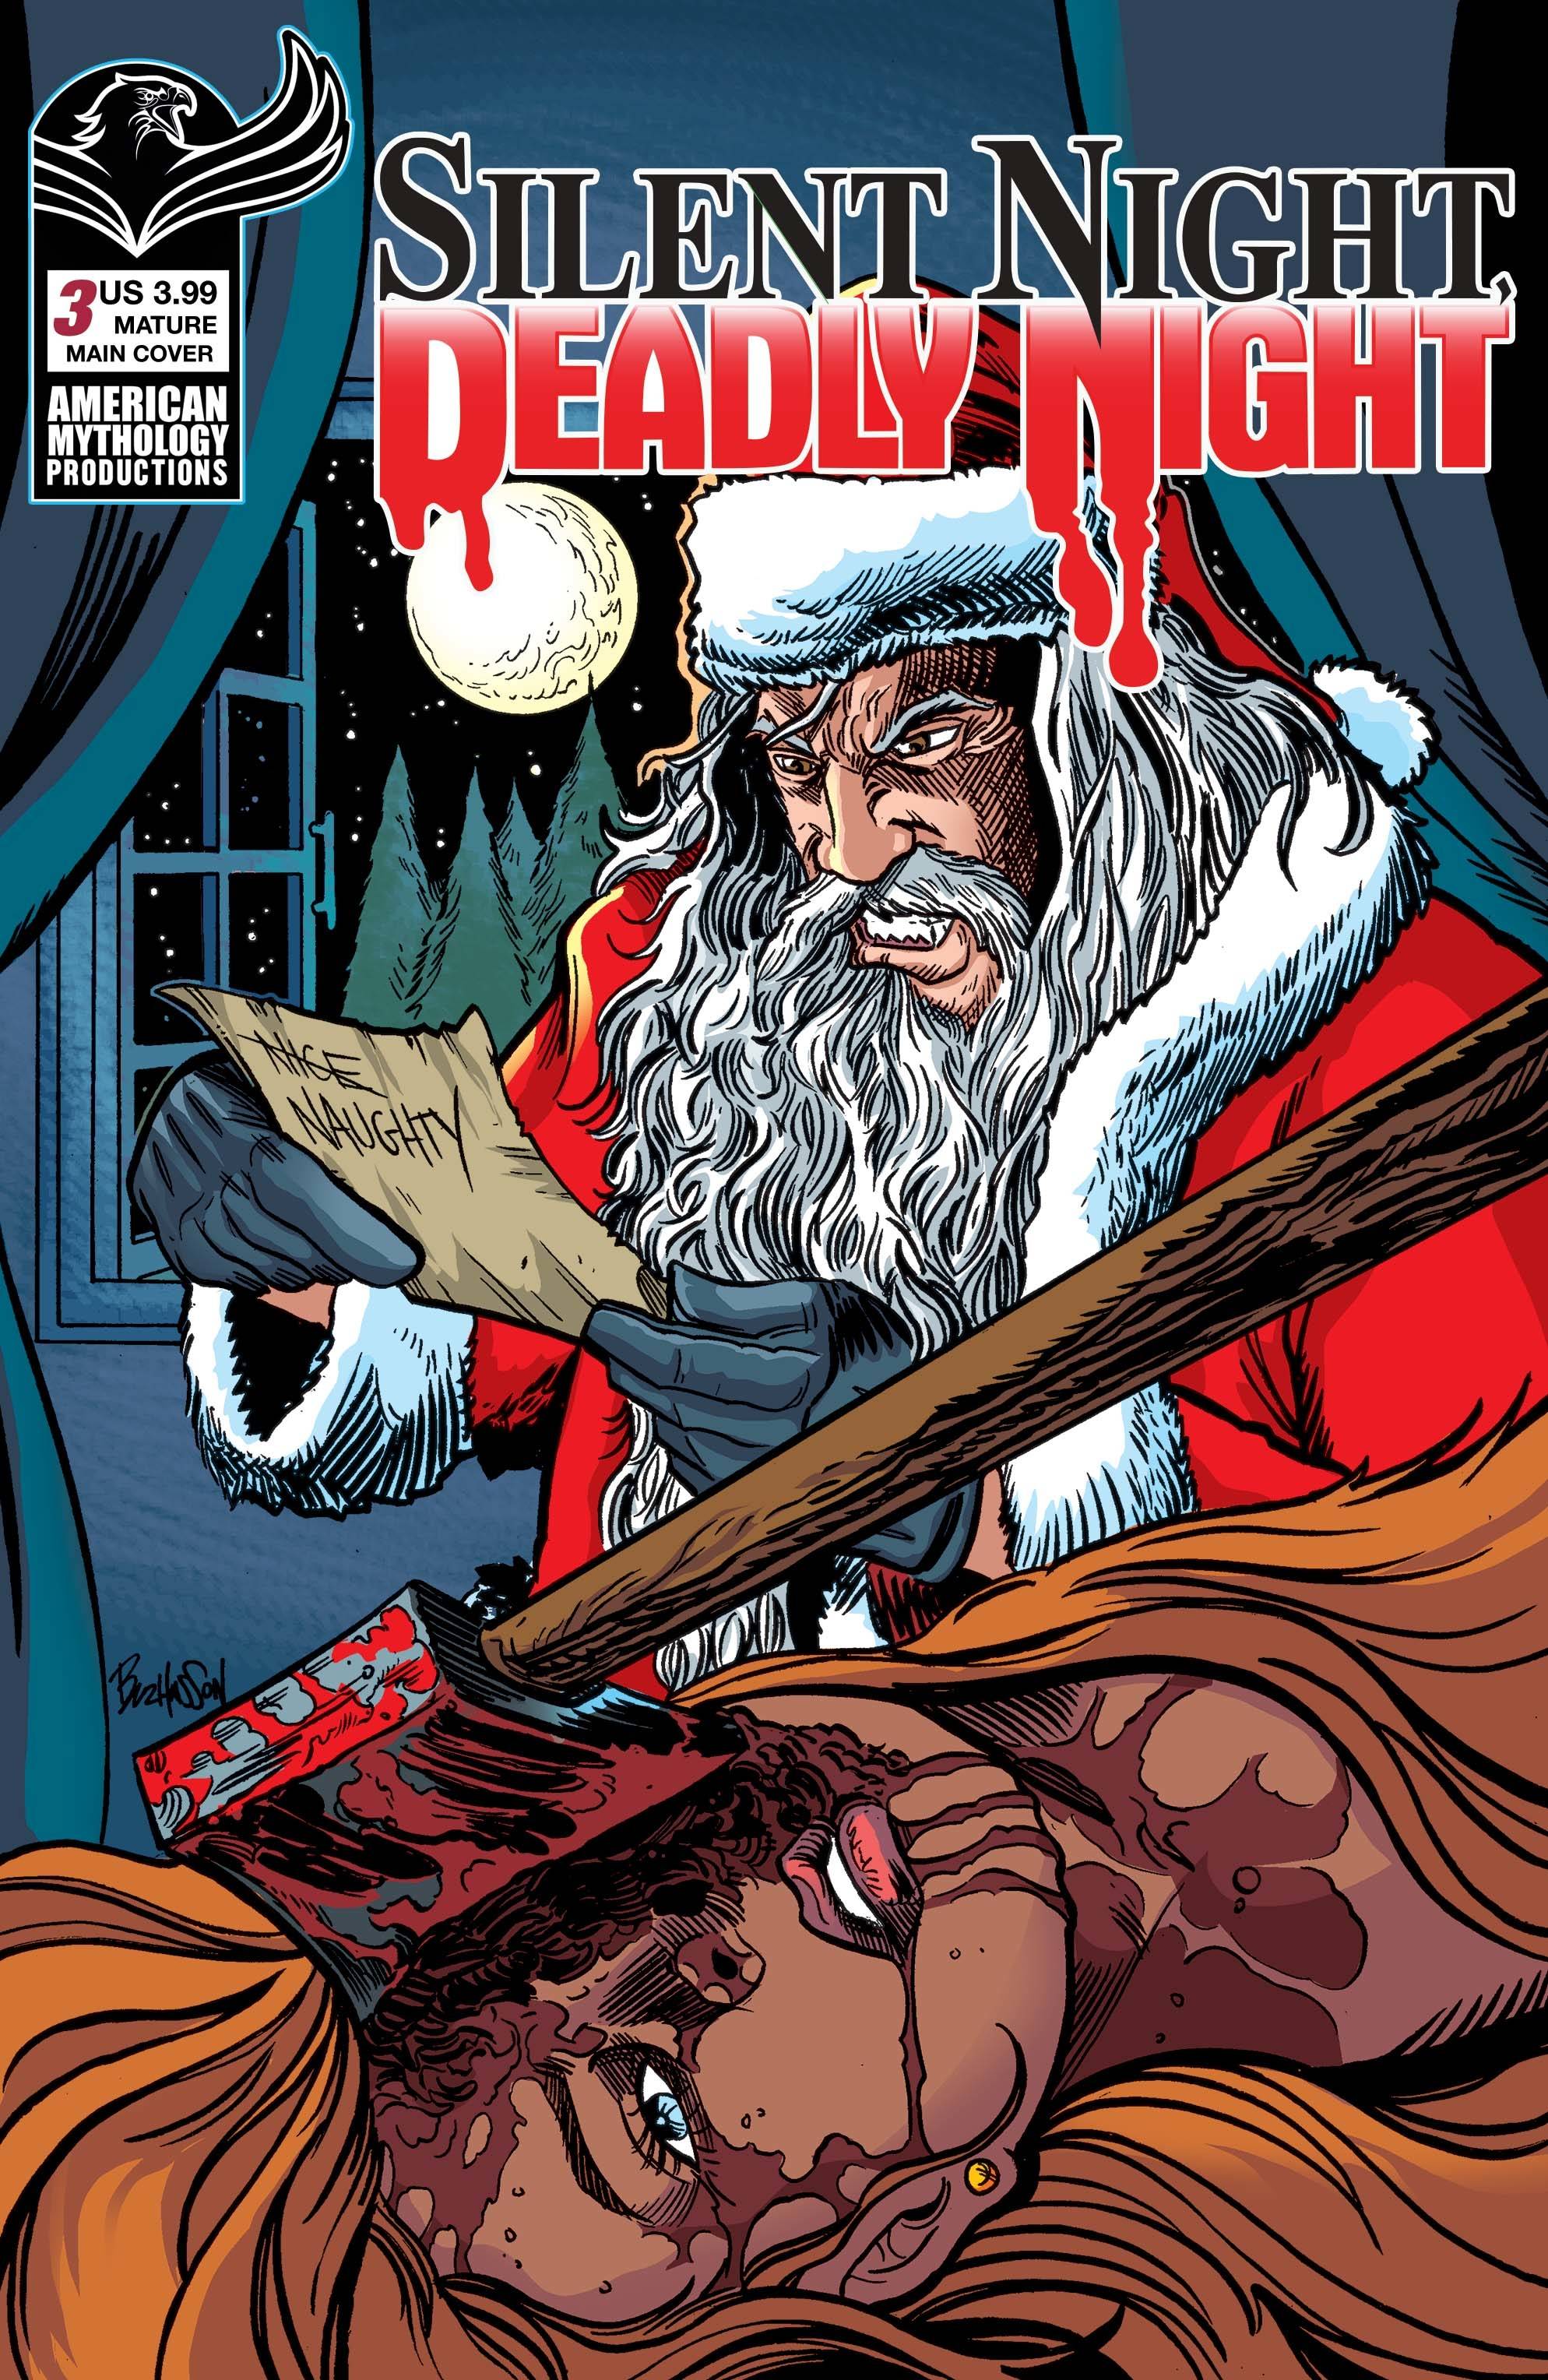 SILENT NIGHT DEADLY NIGHT #3 MAIN CVR A HASSON (O/A) (MR)